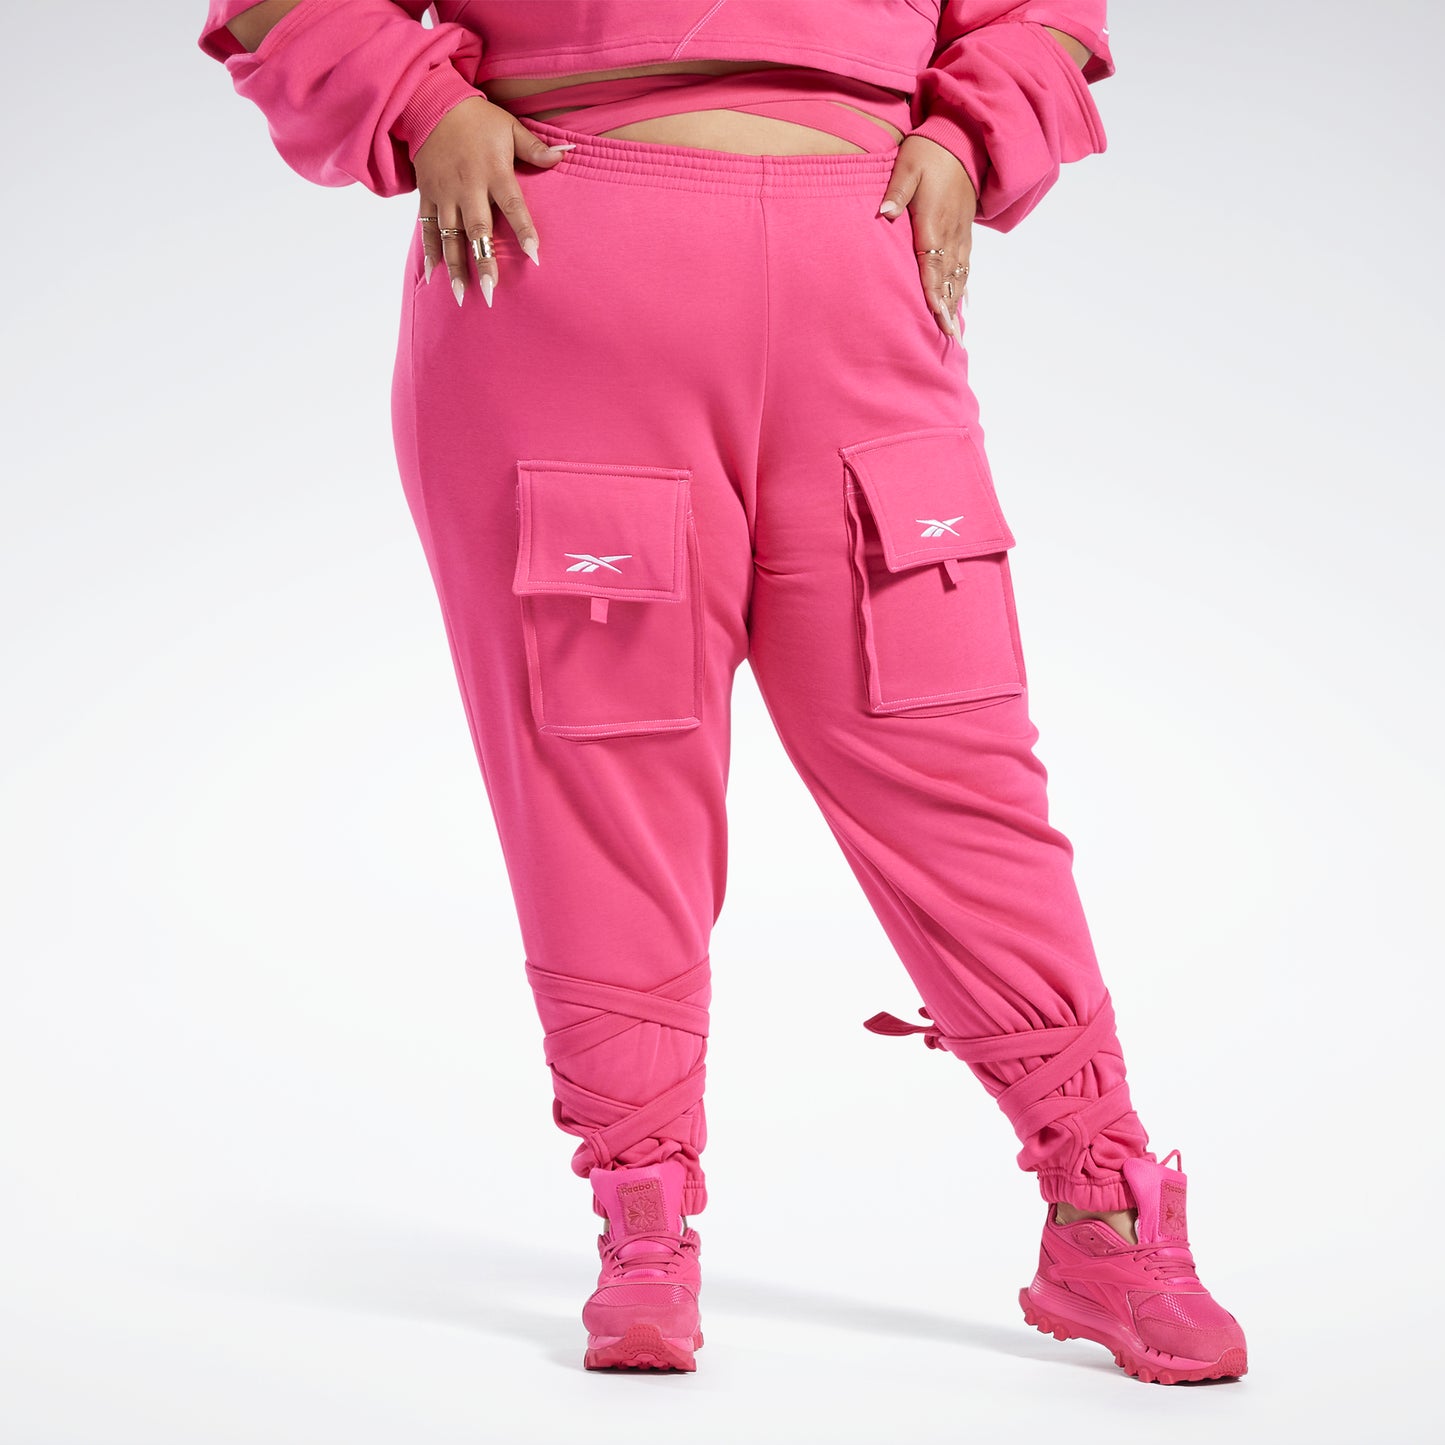 NEW Women;s Reebok Cardi B Workout Pants / Tights XL and M - clothing &  accessories - by owner - apparel sale 